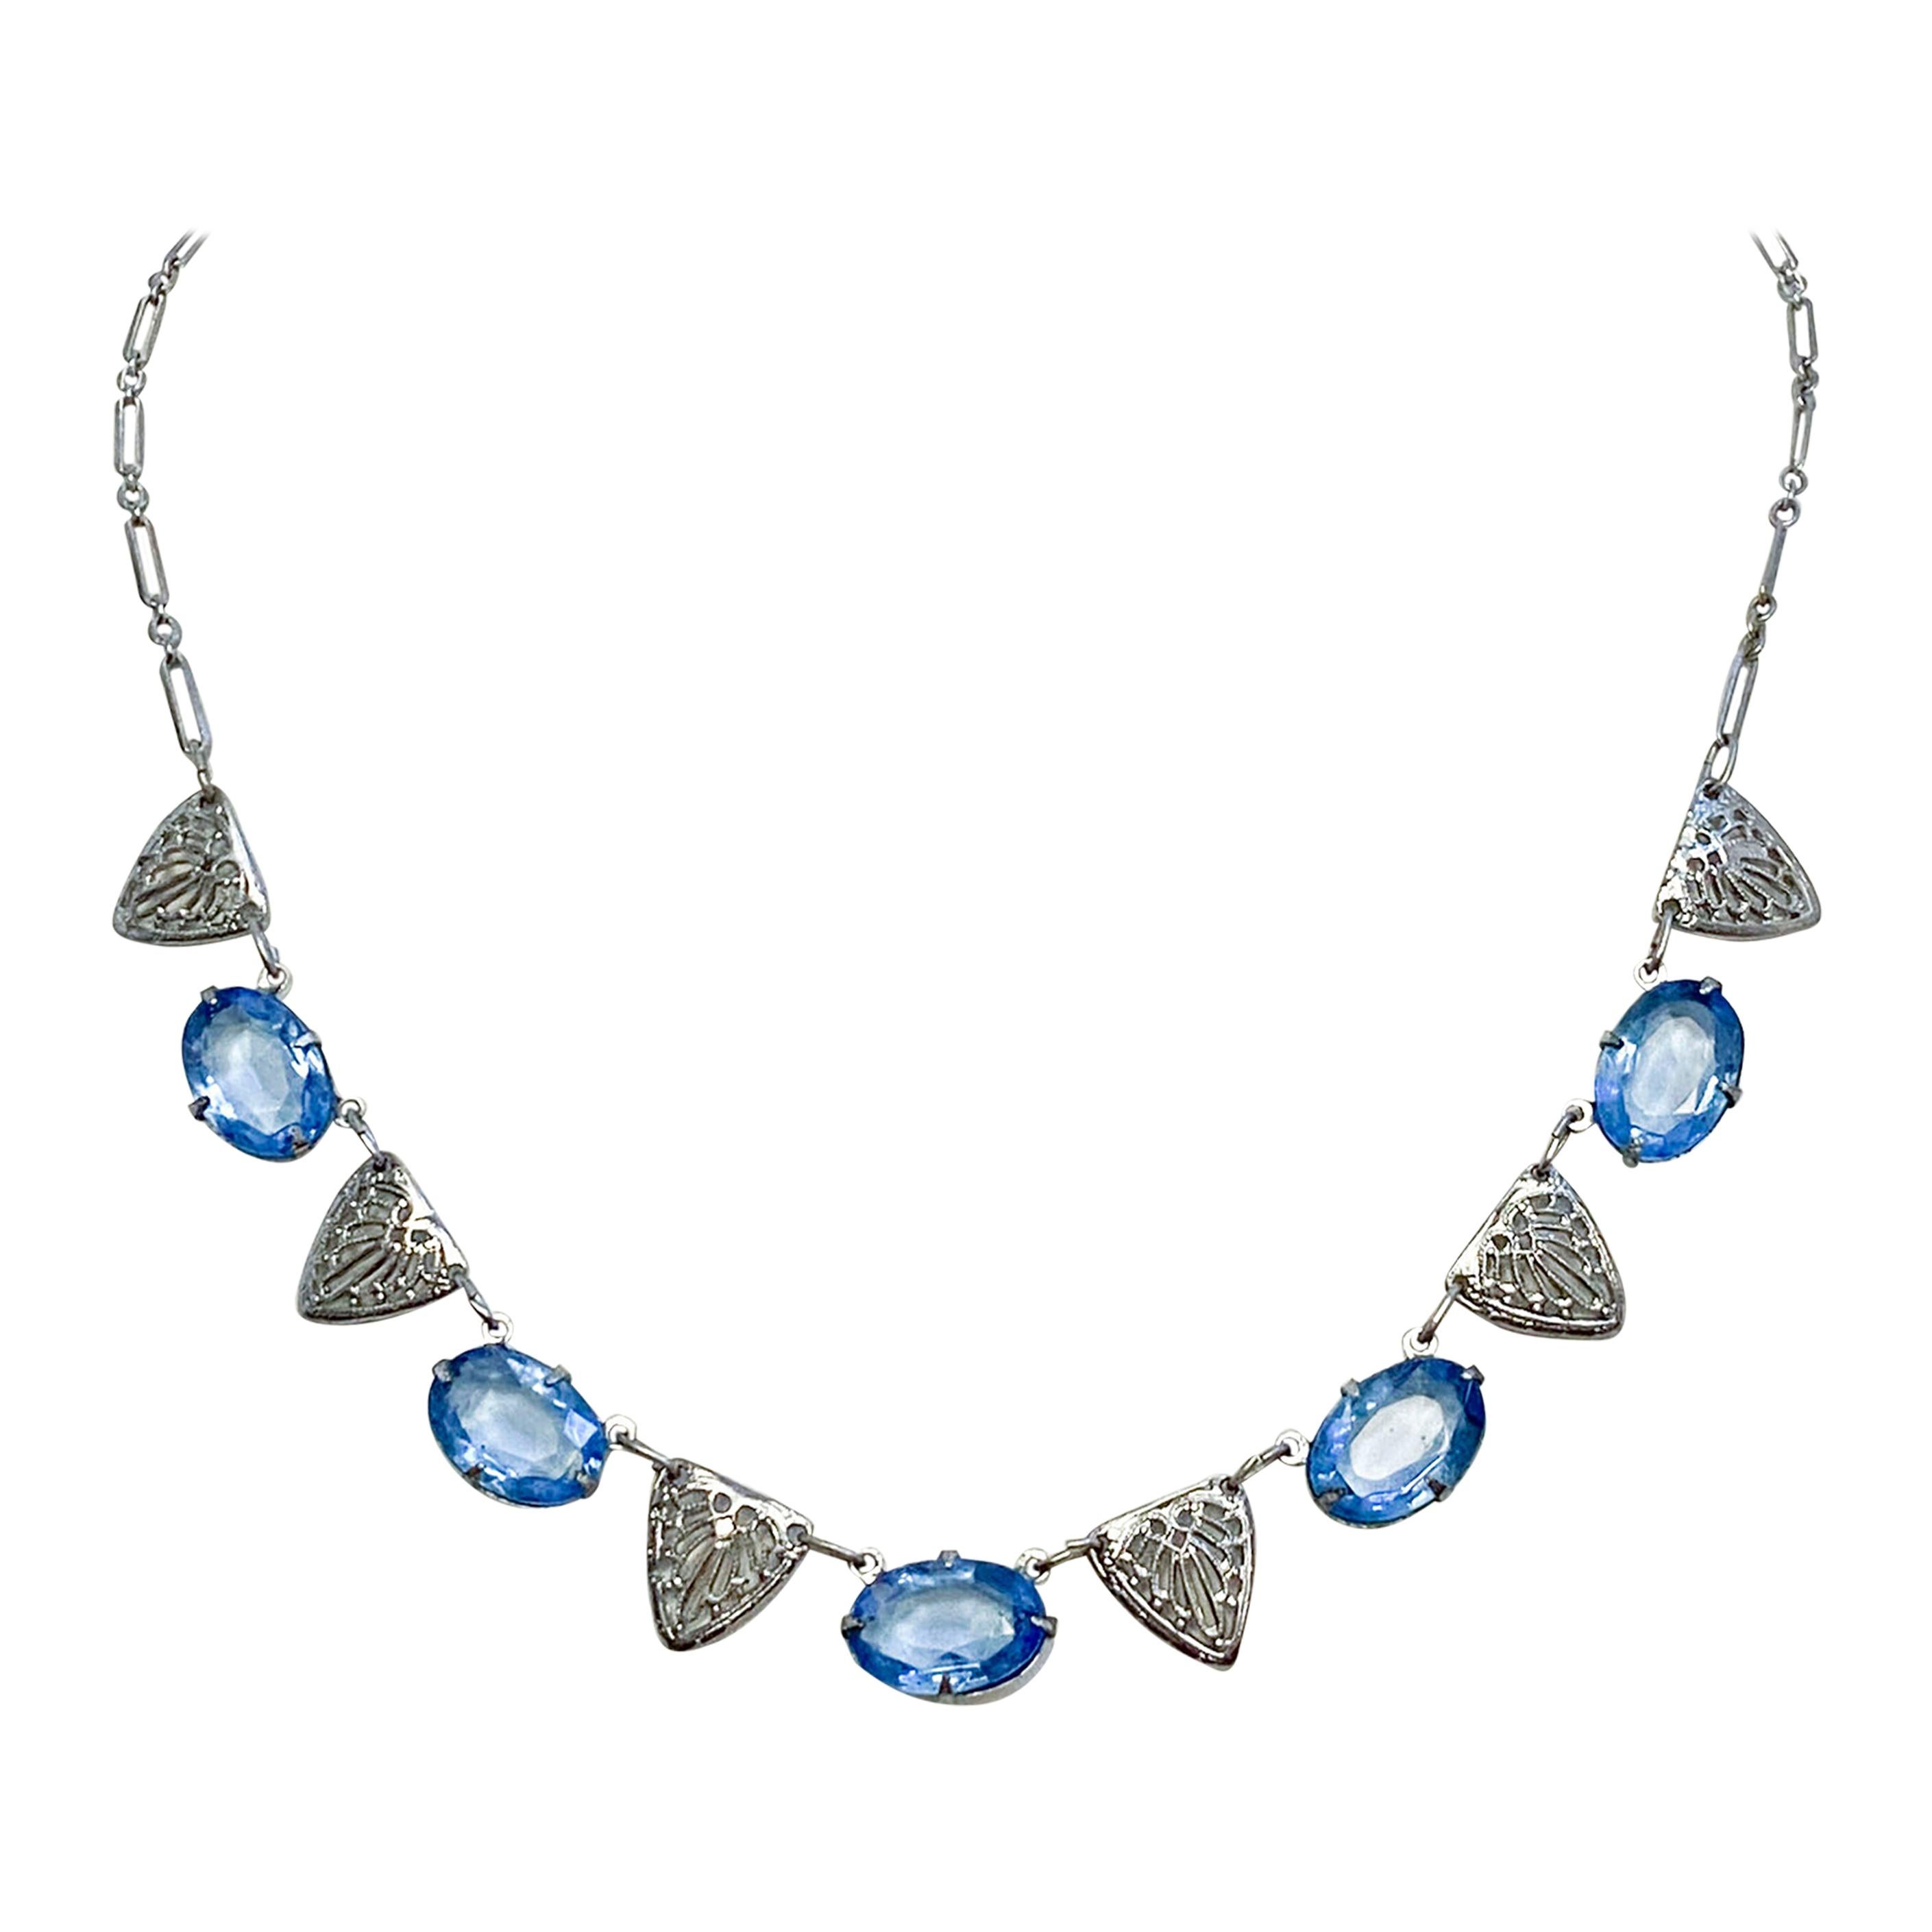 1930s Periwinkle Czech Glass and Sterling Silver Necklace